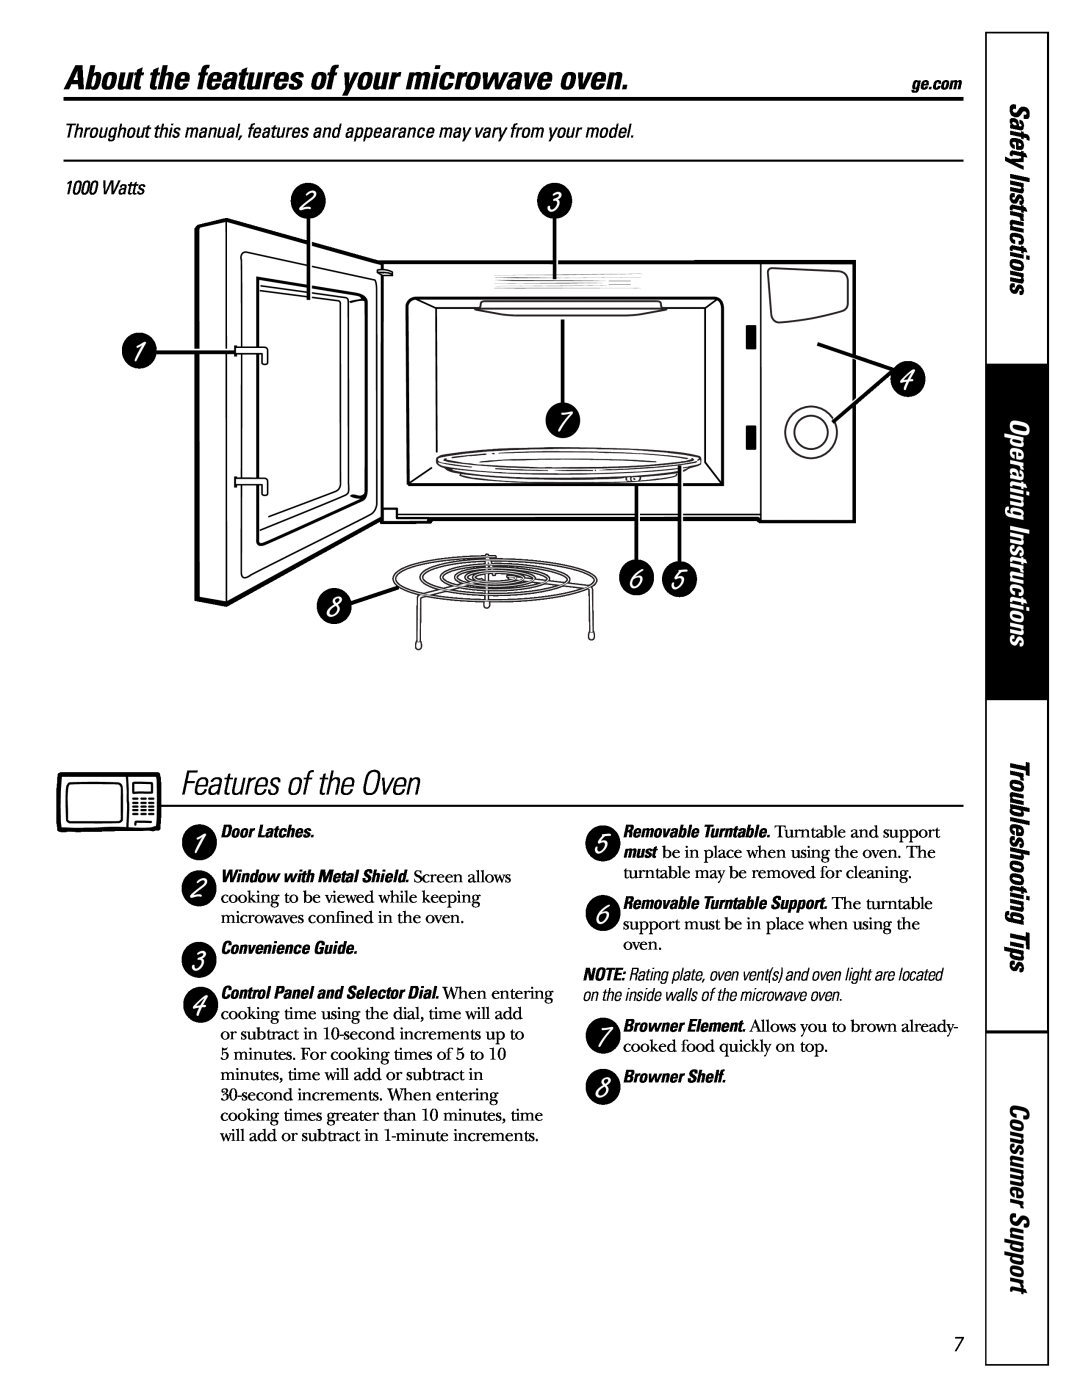 GE WES1384SMSS About the features of your microwave oven, Features of the Oven, Safety Instructions, Troubleshooting Tips 